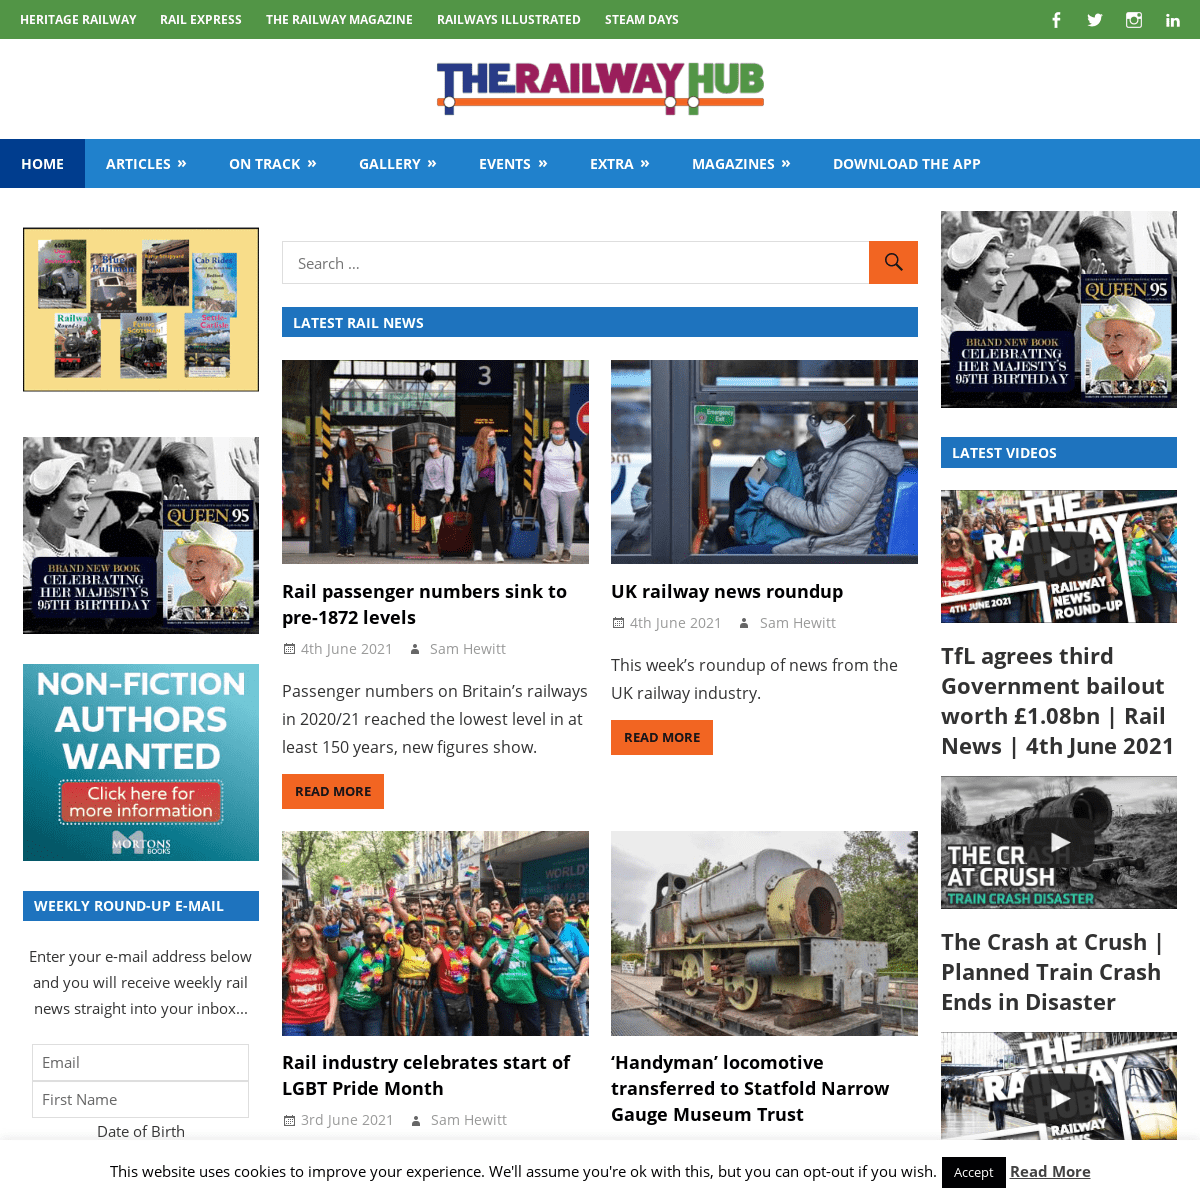 A complete backup of https://therailwayhub.co.uk